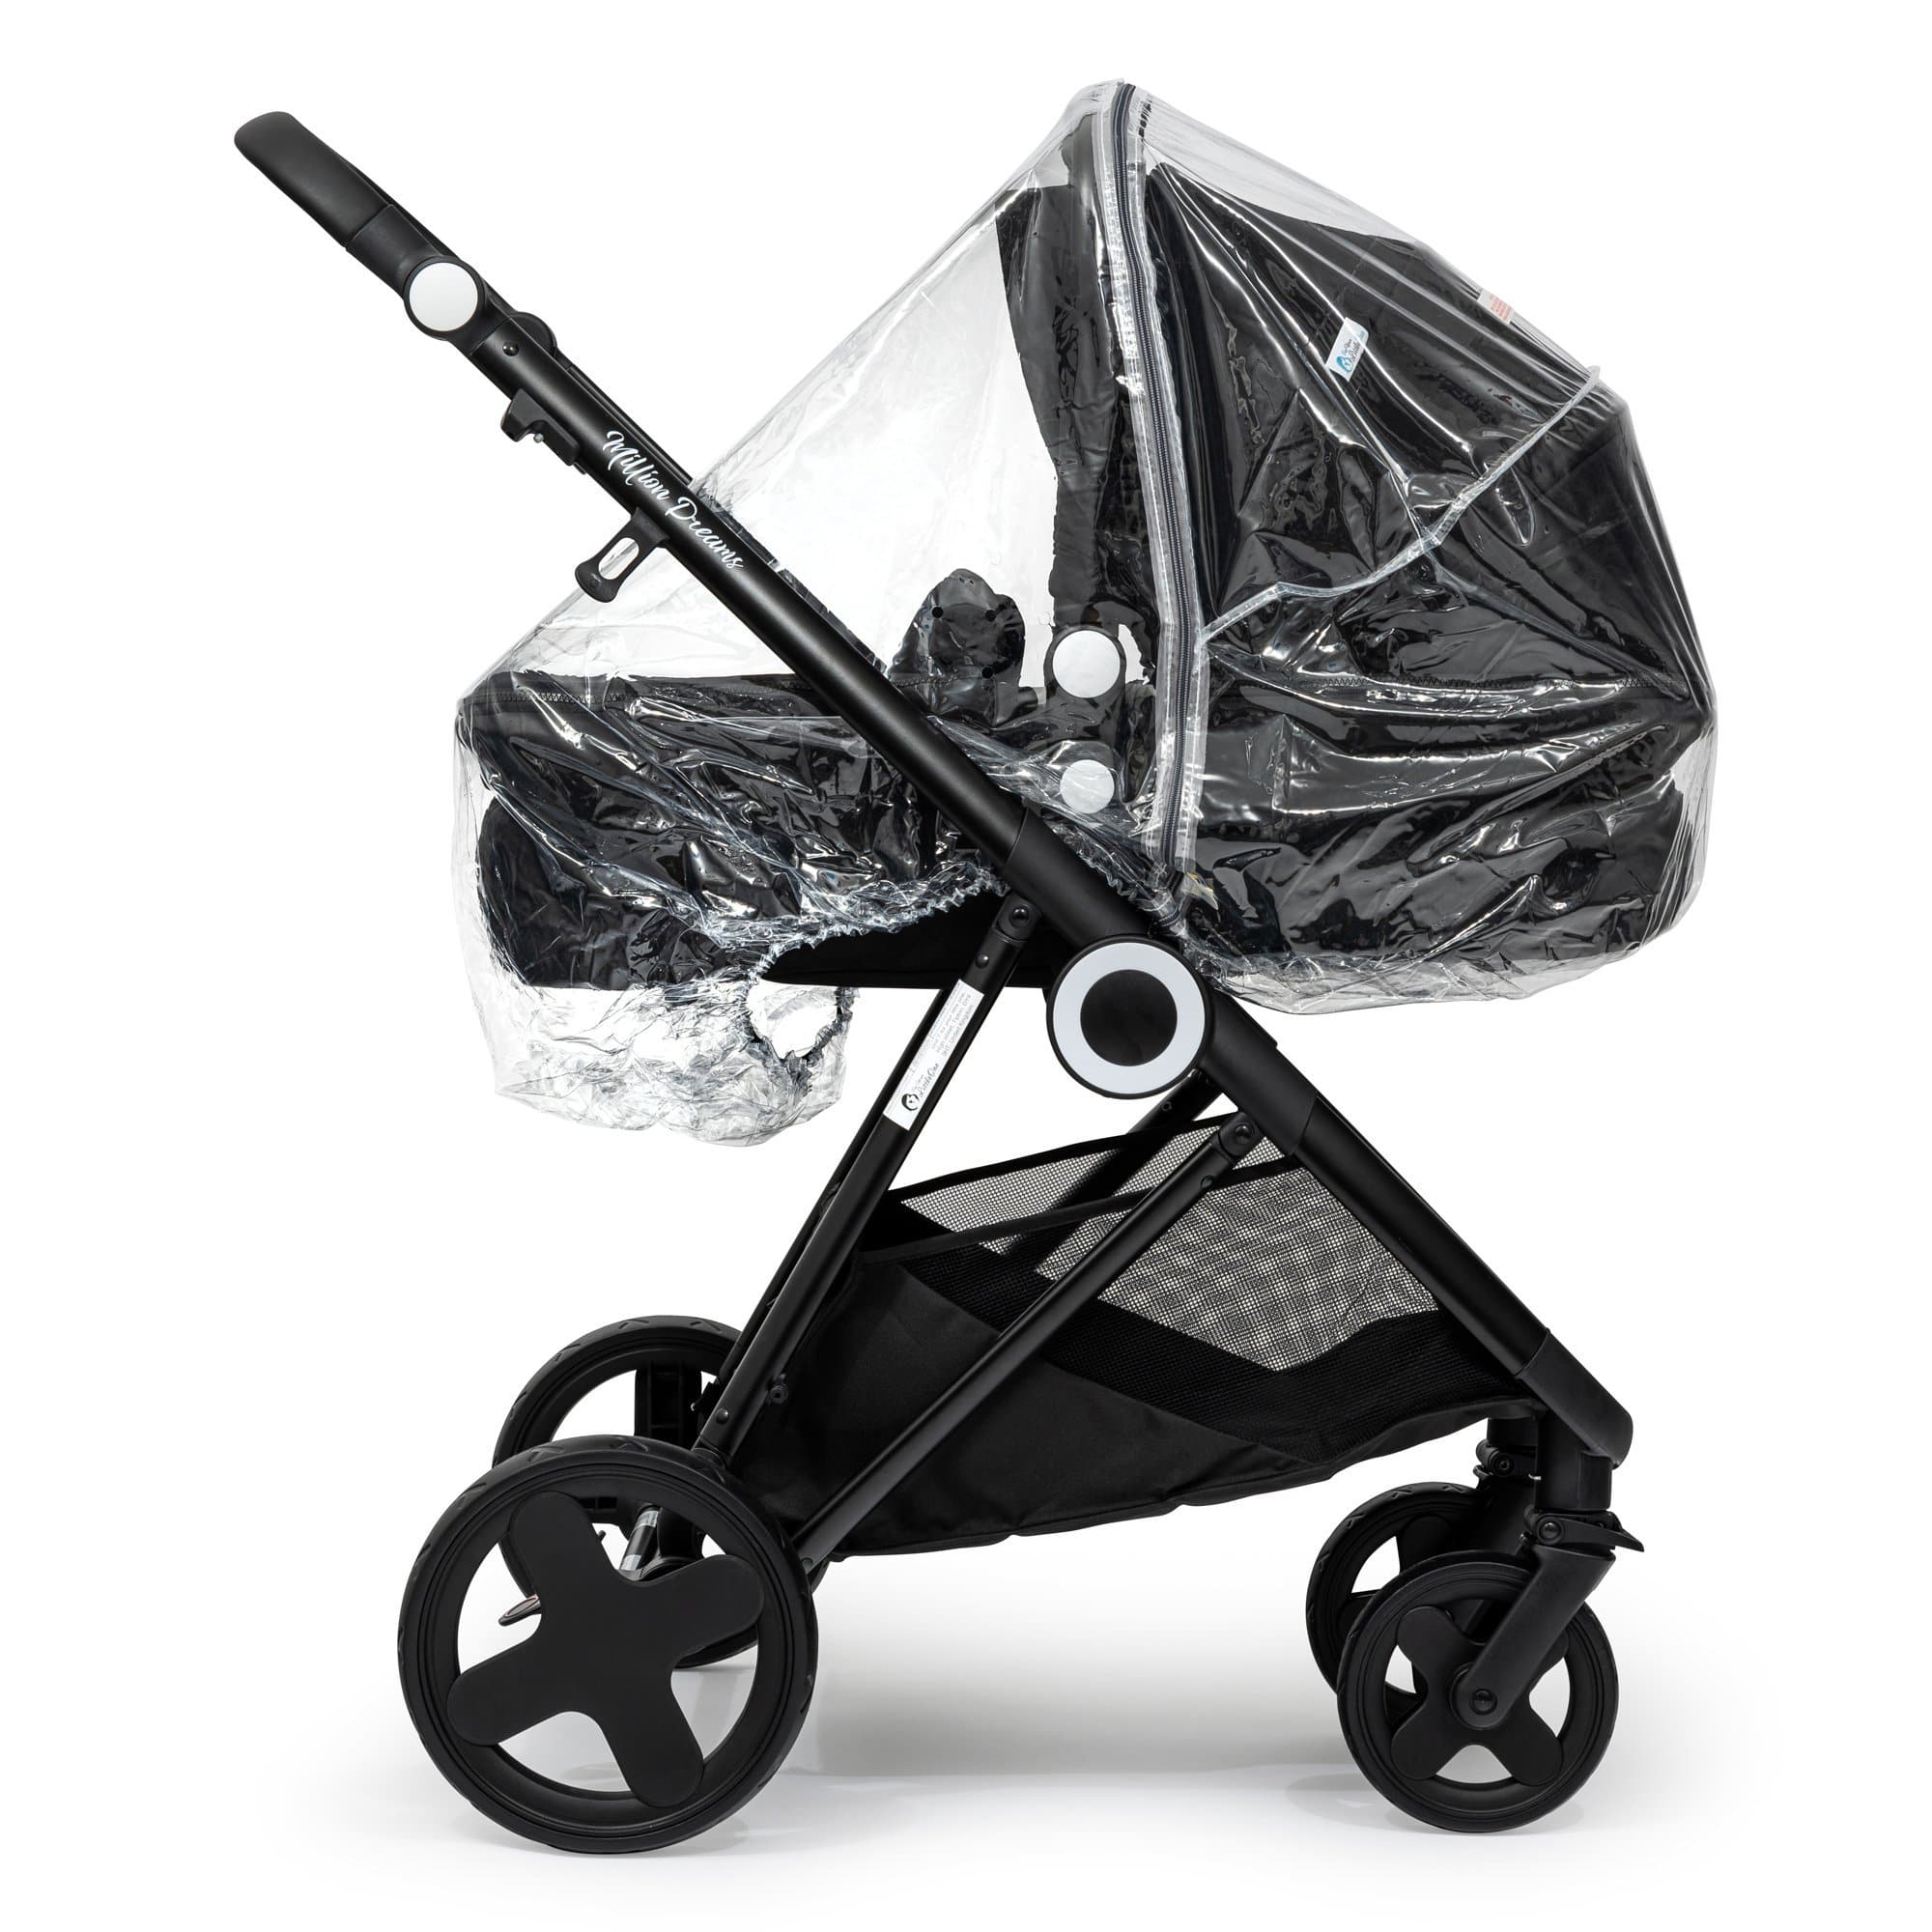 2 in 1 Rain Cover Compatible with BabiesRus - Fits All Models - For Your Little One